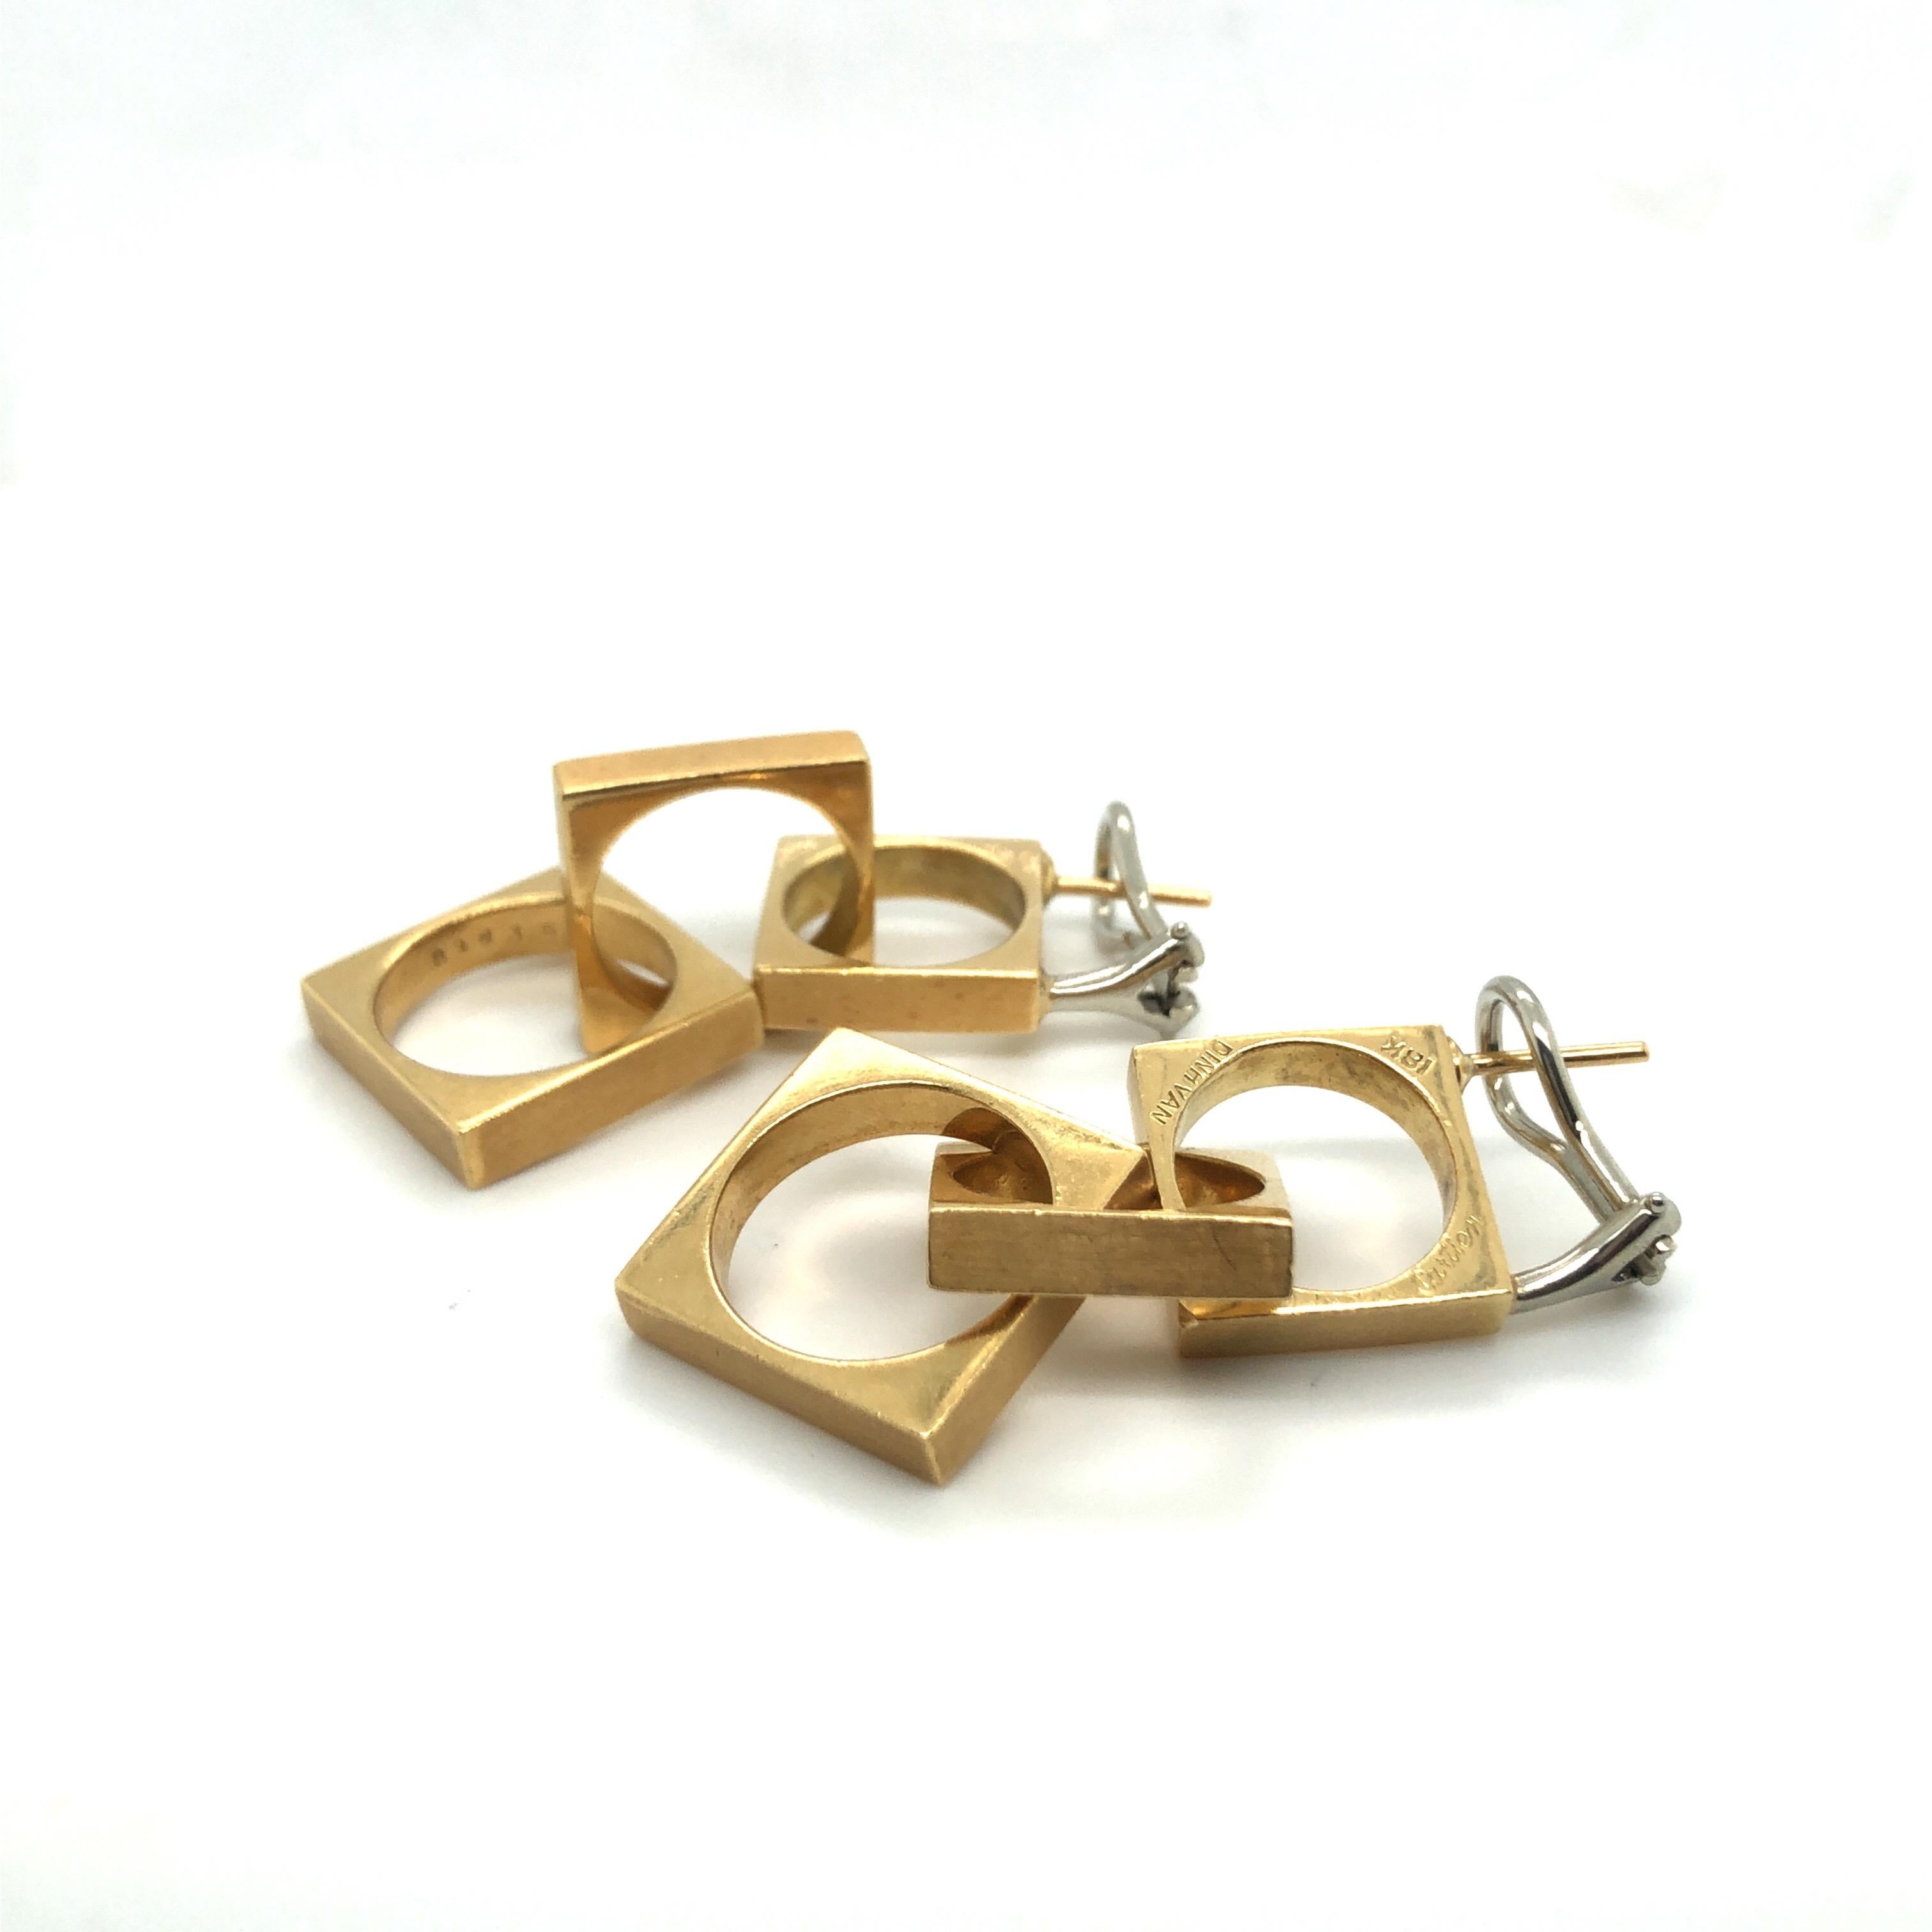 Stylish geometric 18 karat yellow gold dangle ear pendants by Dinh Van for Cartier.
Masterfully handcrafted in 18 karat yellow gold, each earring consists of 3 interlocking square links with an open circular center and is completed by an hinged